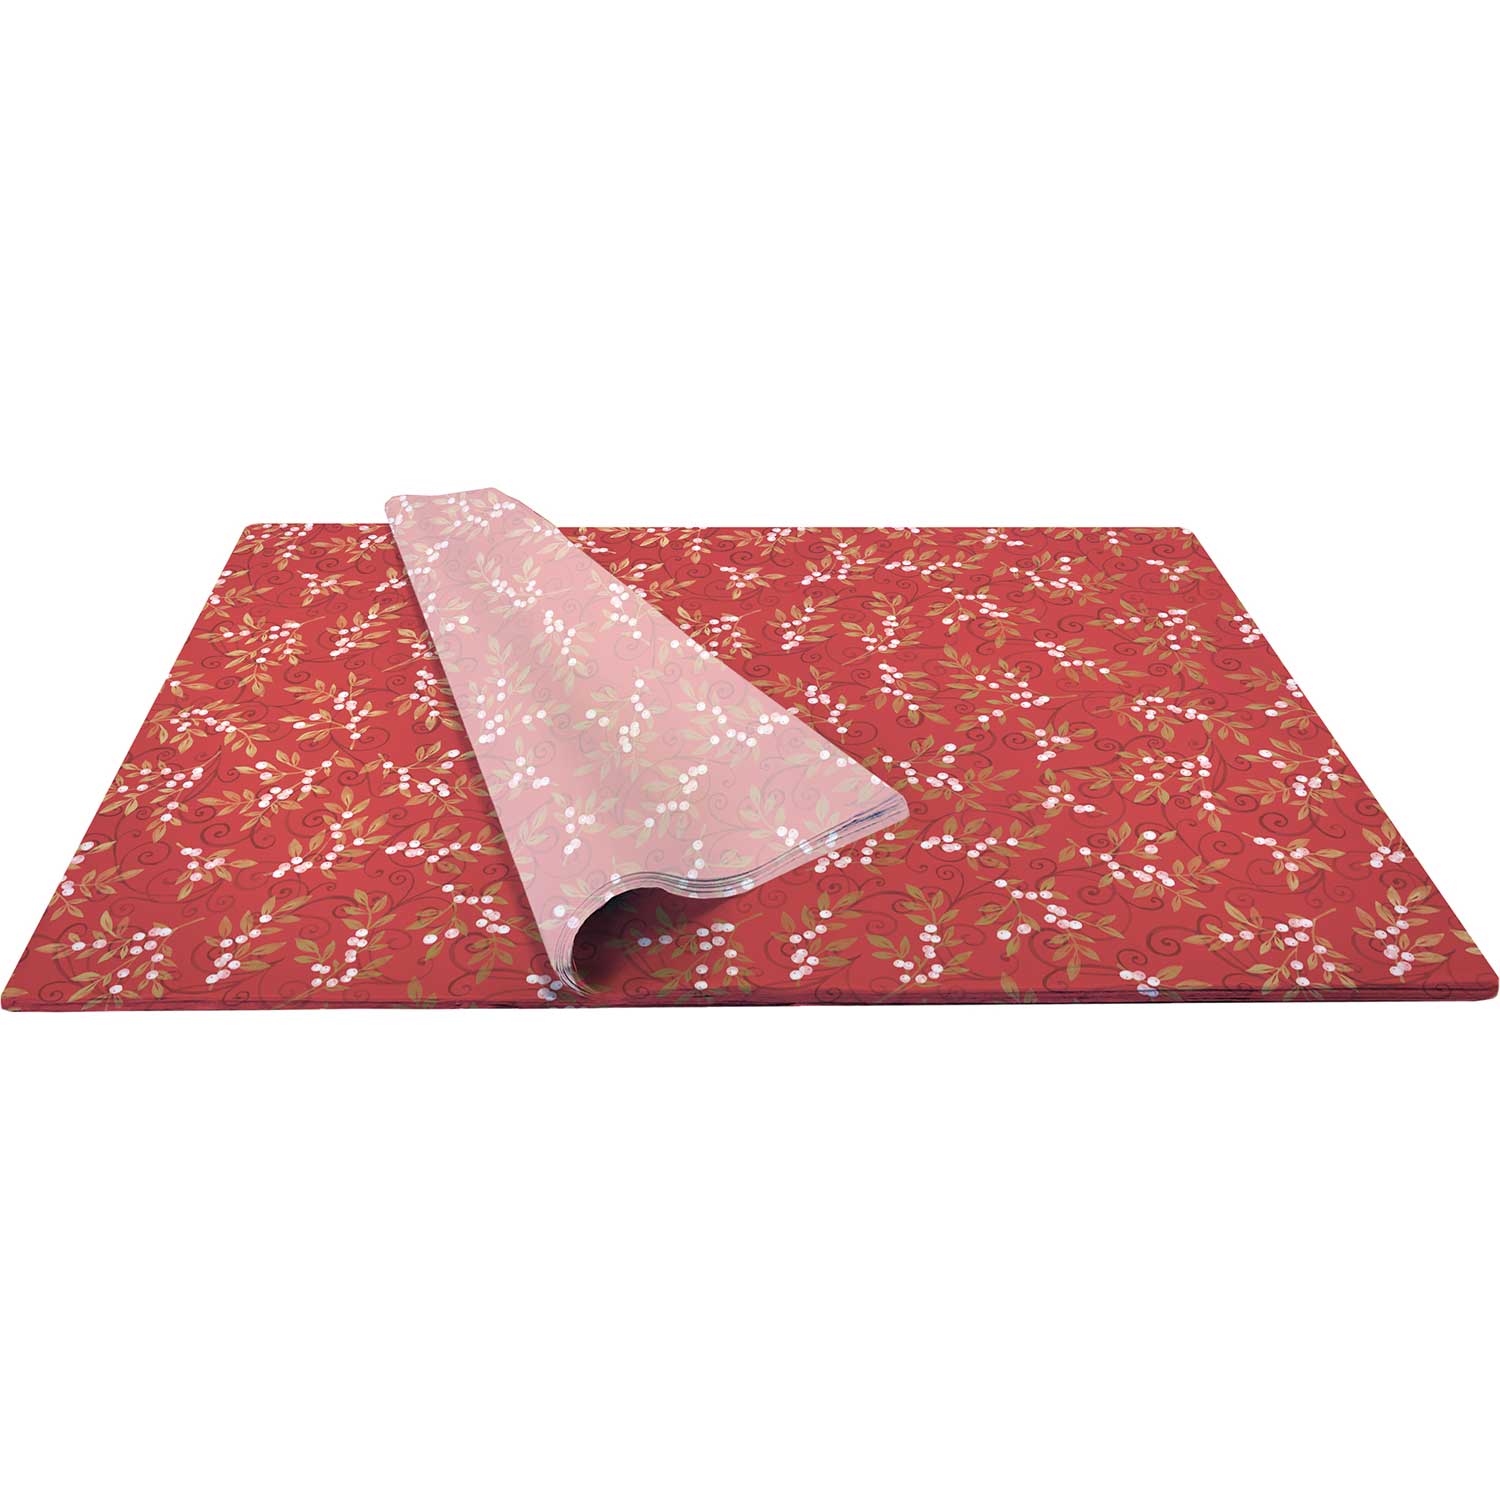 Holiday Floral 20 x 30 Christmas Gift Tissue Paper, 24 Folded Sheets